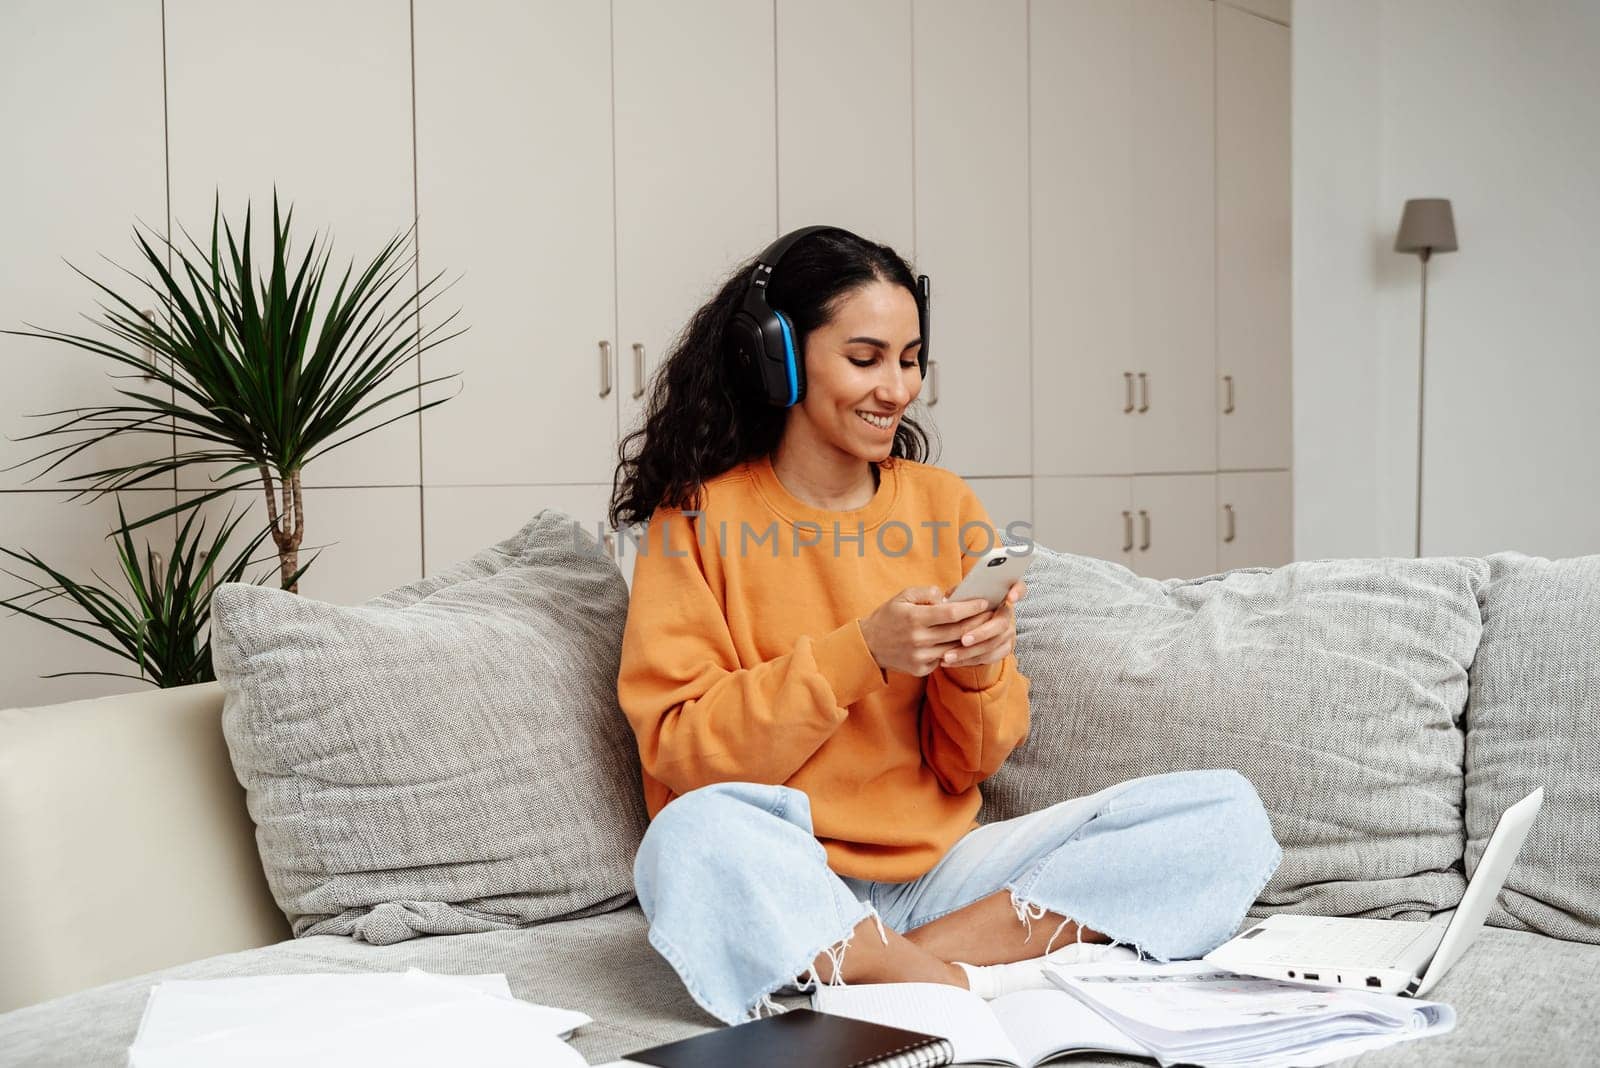 Arab teenager girl looks through messages in the phone and writes down homework. Listening to the seminar through headphones. The concept of distance learning. Female student happily studying at home